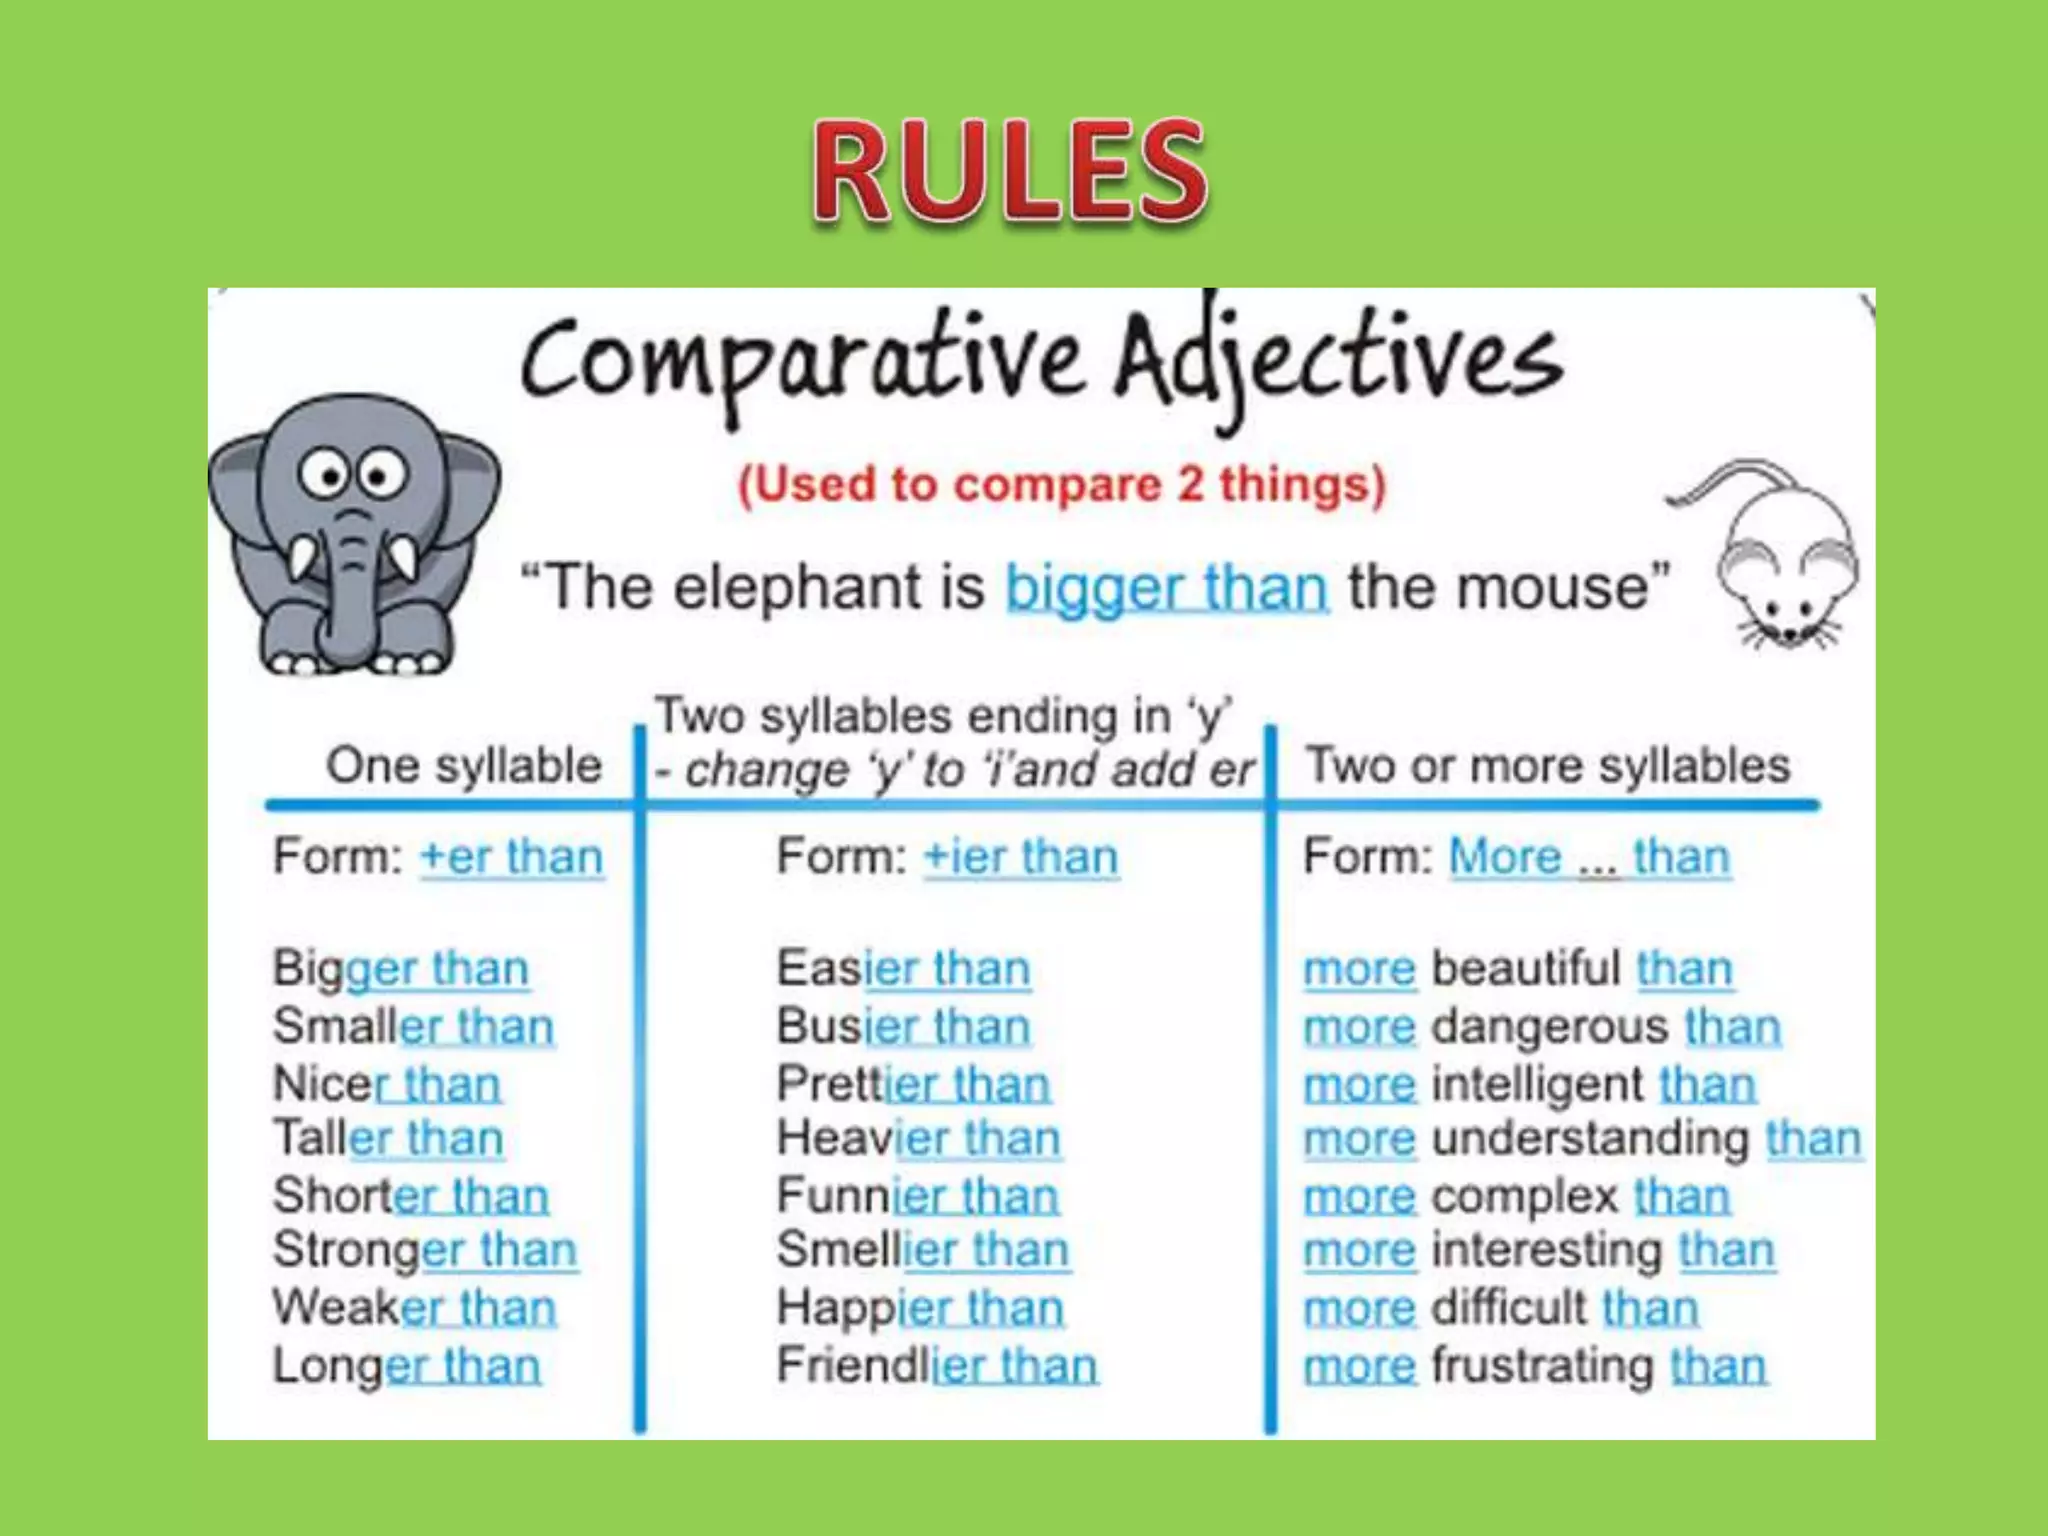 Comparative правило. Comparatives and Superlatives. Superlative adjectives правило. Comparatives and Superlatives правило. Comparative adjectives правило для детей.